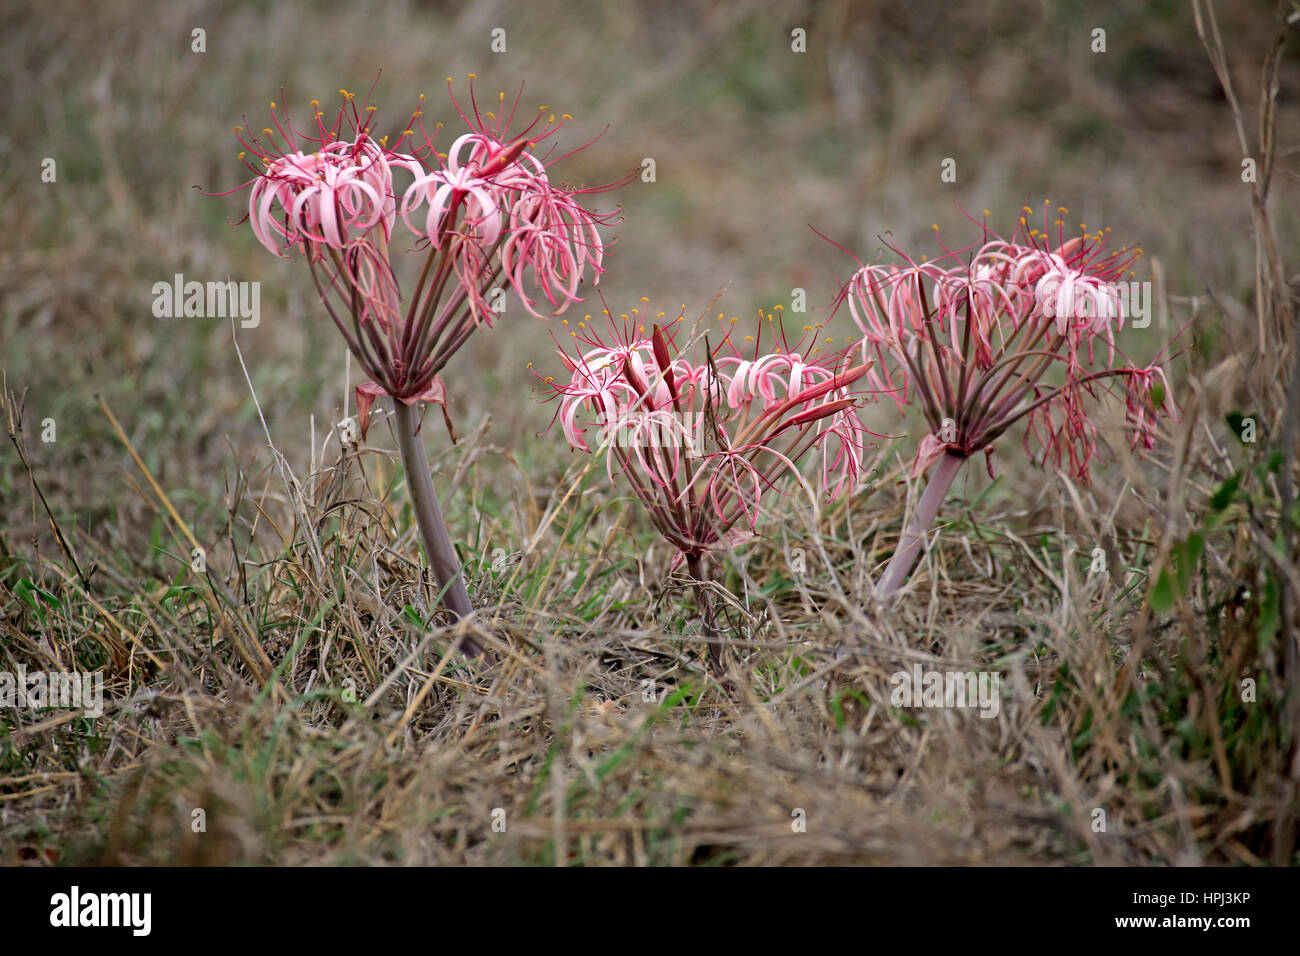 Sand lily, (Crinum buphanoides), blooming, Kruger Nationalpark, South Africa, Africa Stock Photo